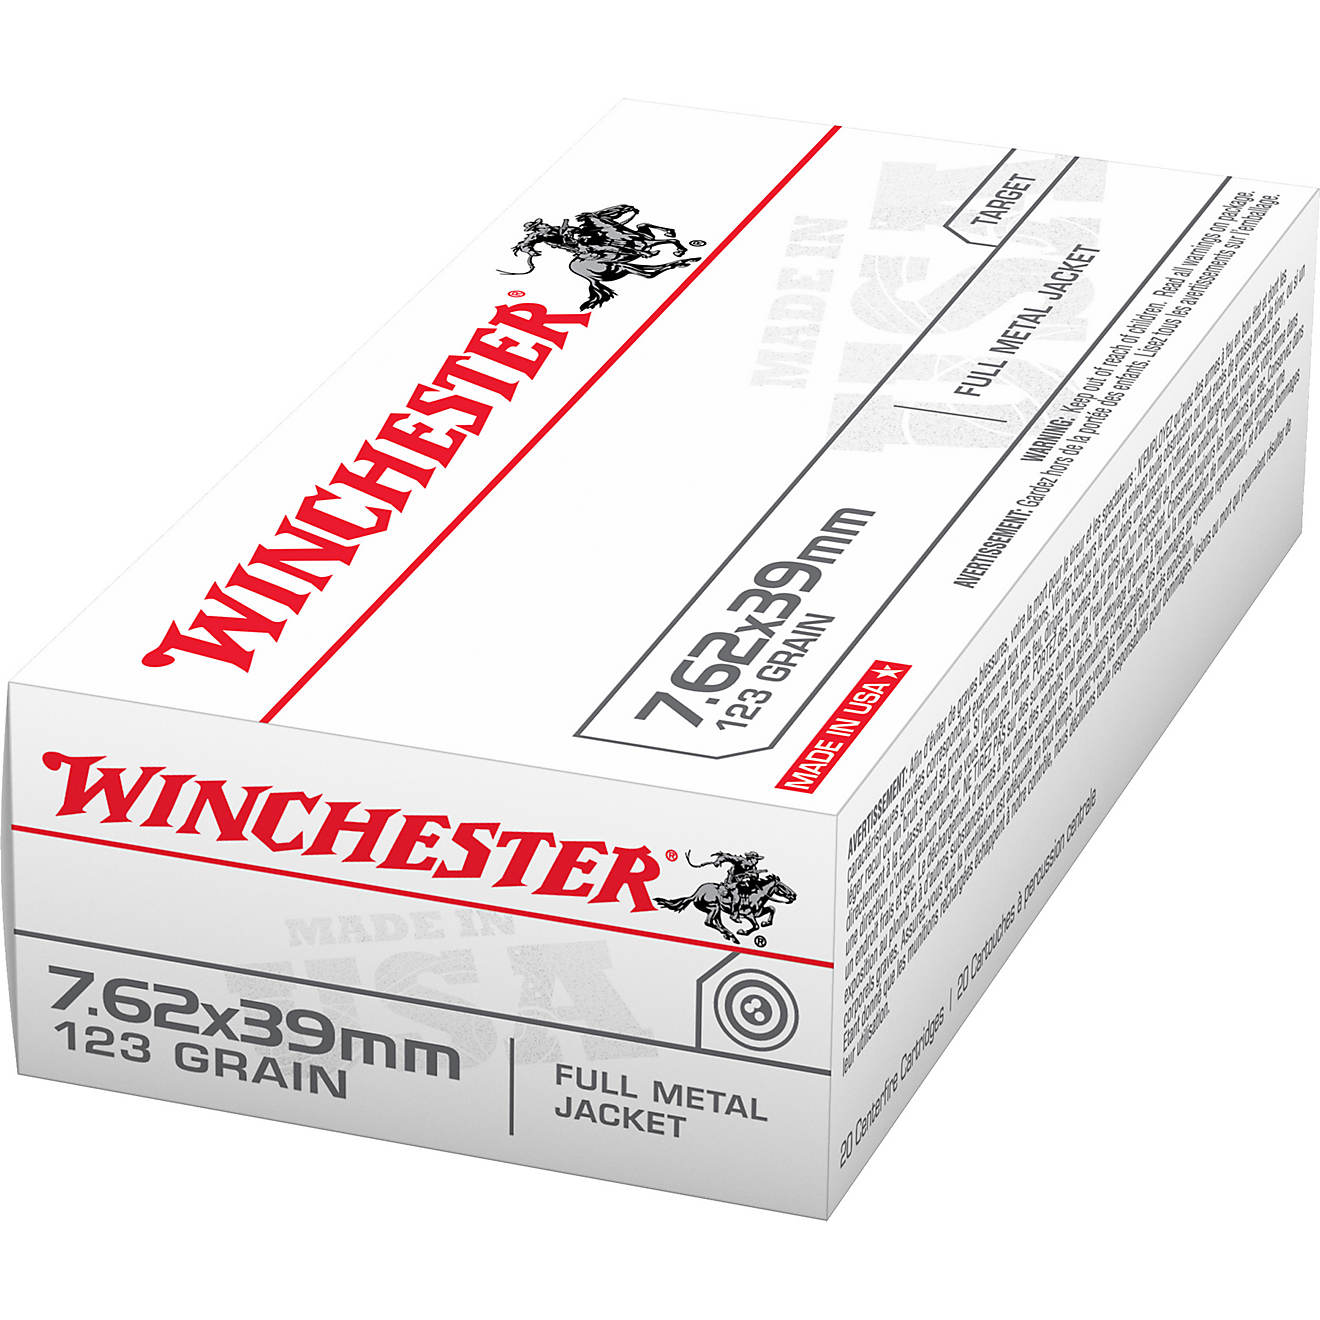 Winchester 7.62 x 39 mm Russian 123-Grain Full Metal Jacket Ammunition                                                           - view number 1